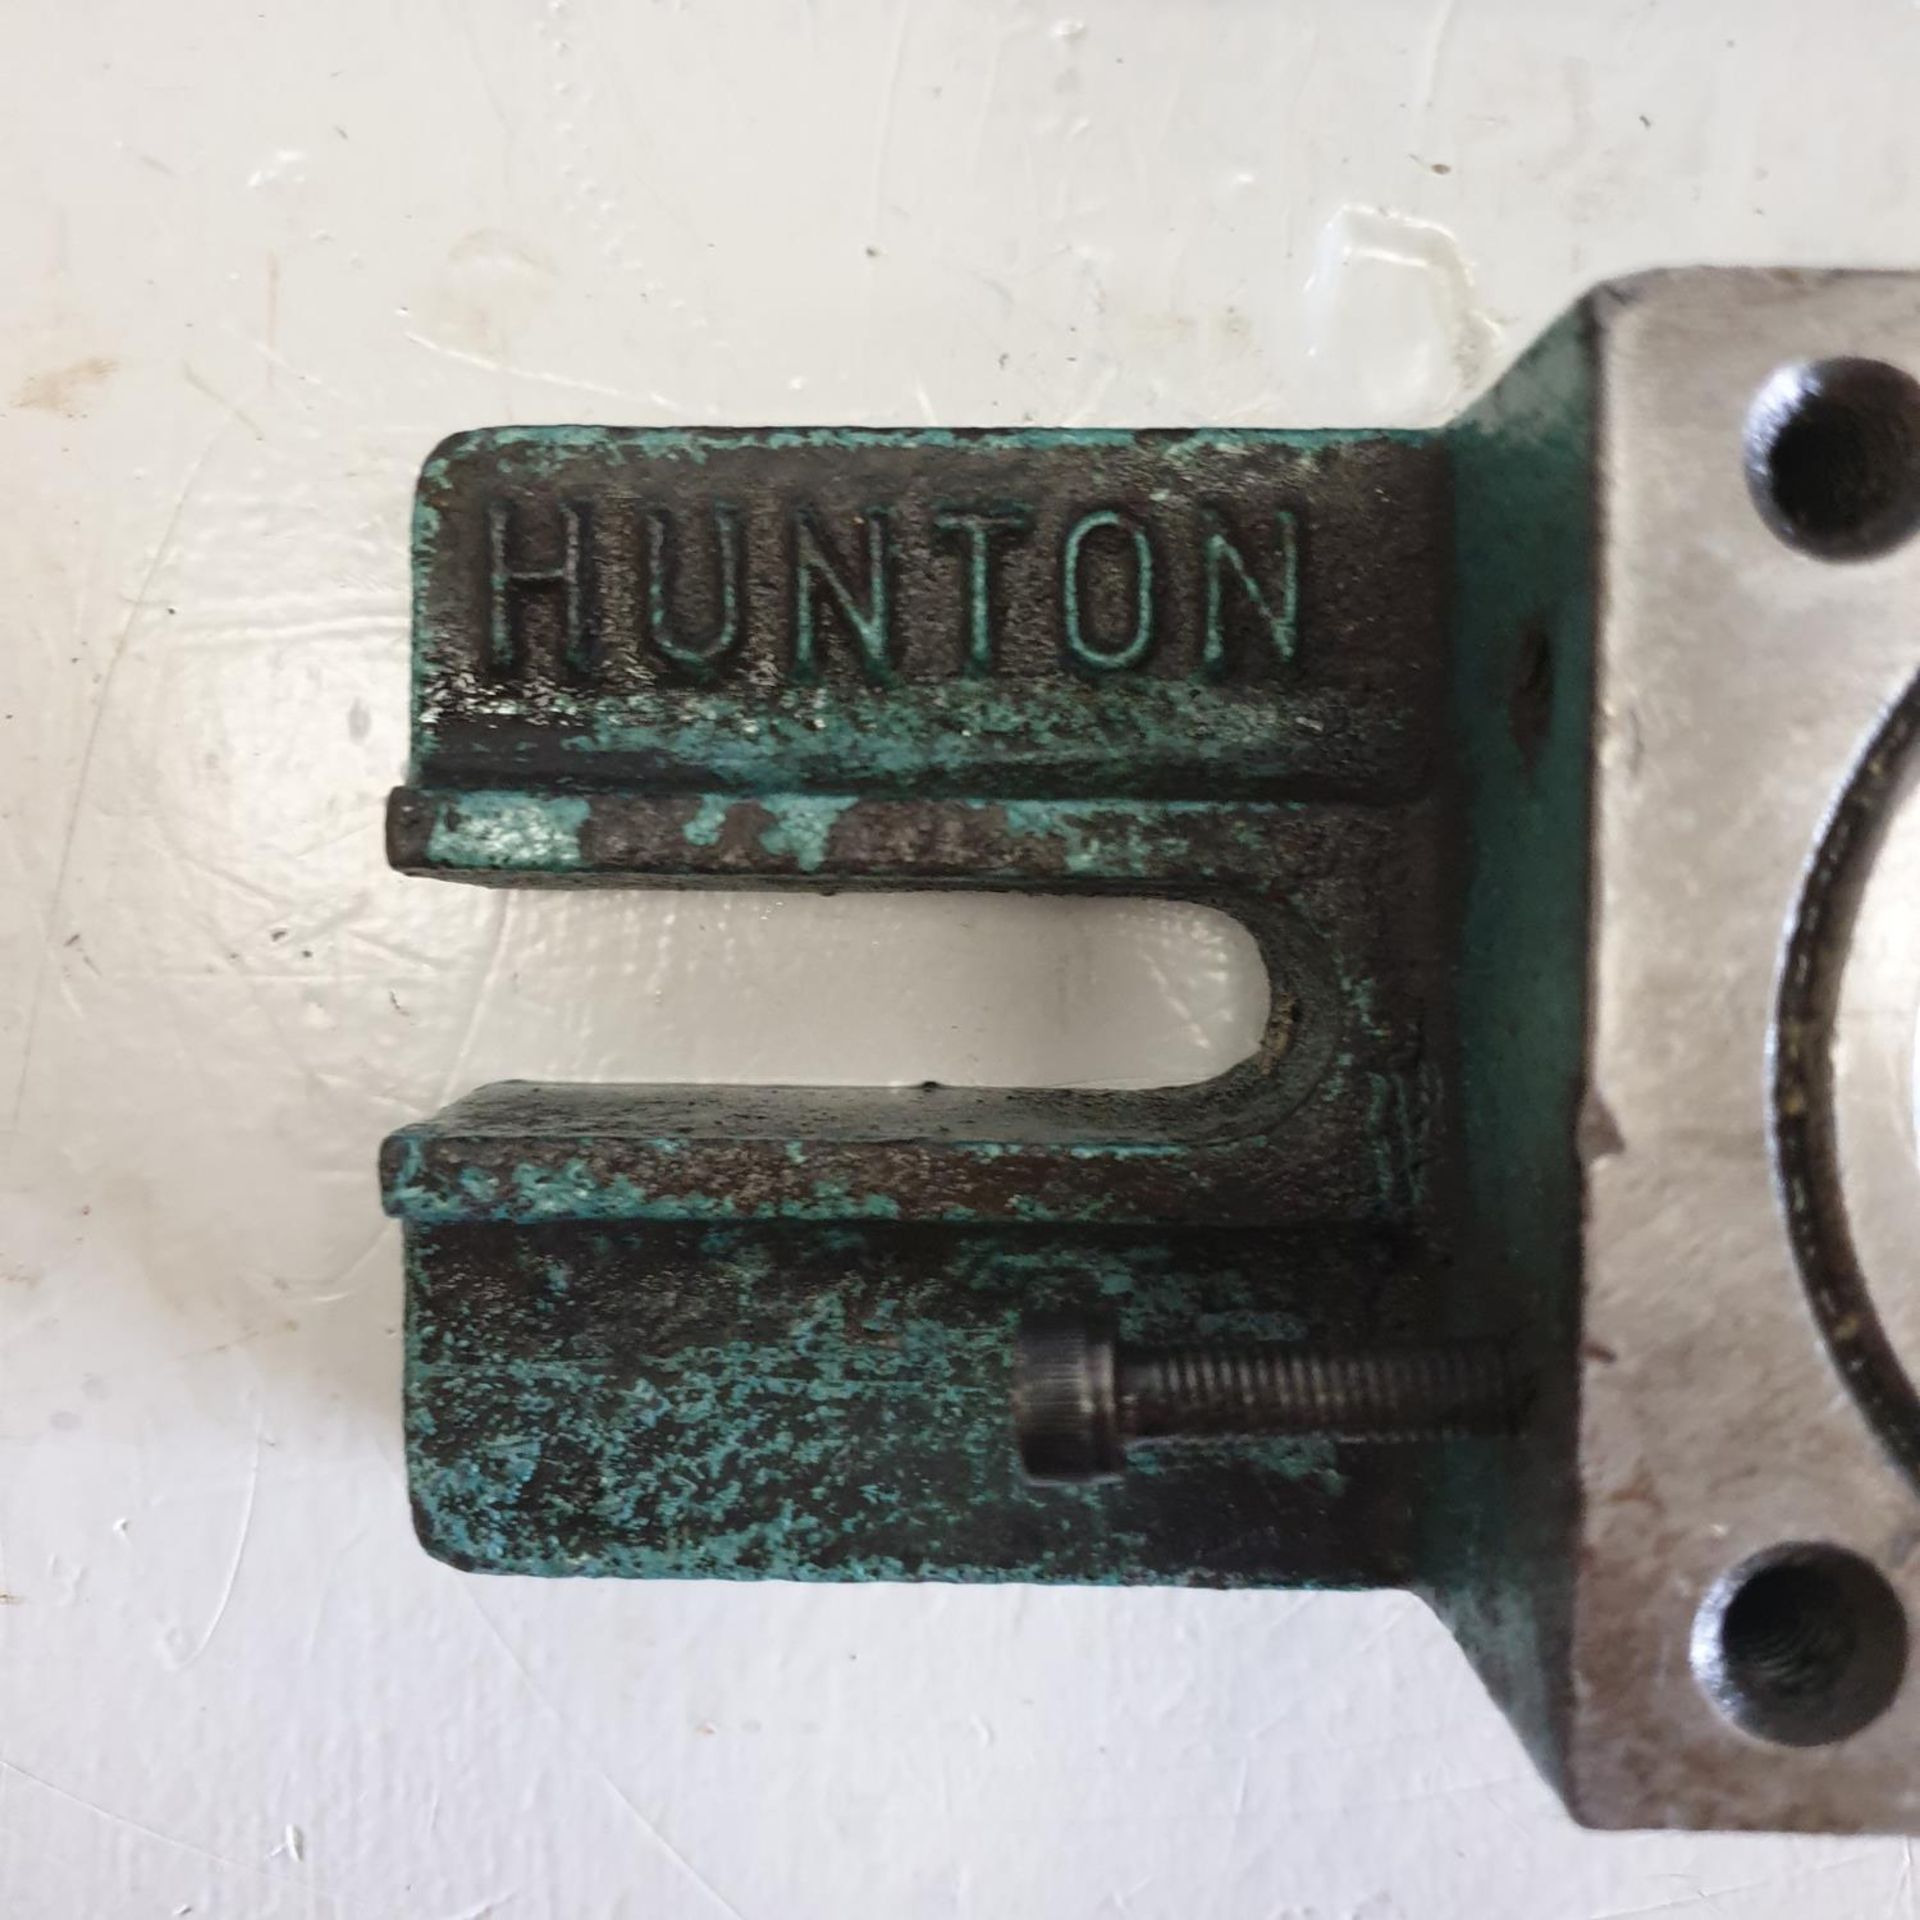 Two Hunton Universal Fly Press Bolster Outfits. Small No.1, 1/8" - 1 3/4" & Type 2, 1/8" to 3 3/4". - Image 5 of 7